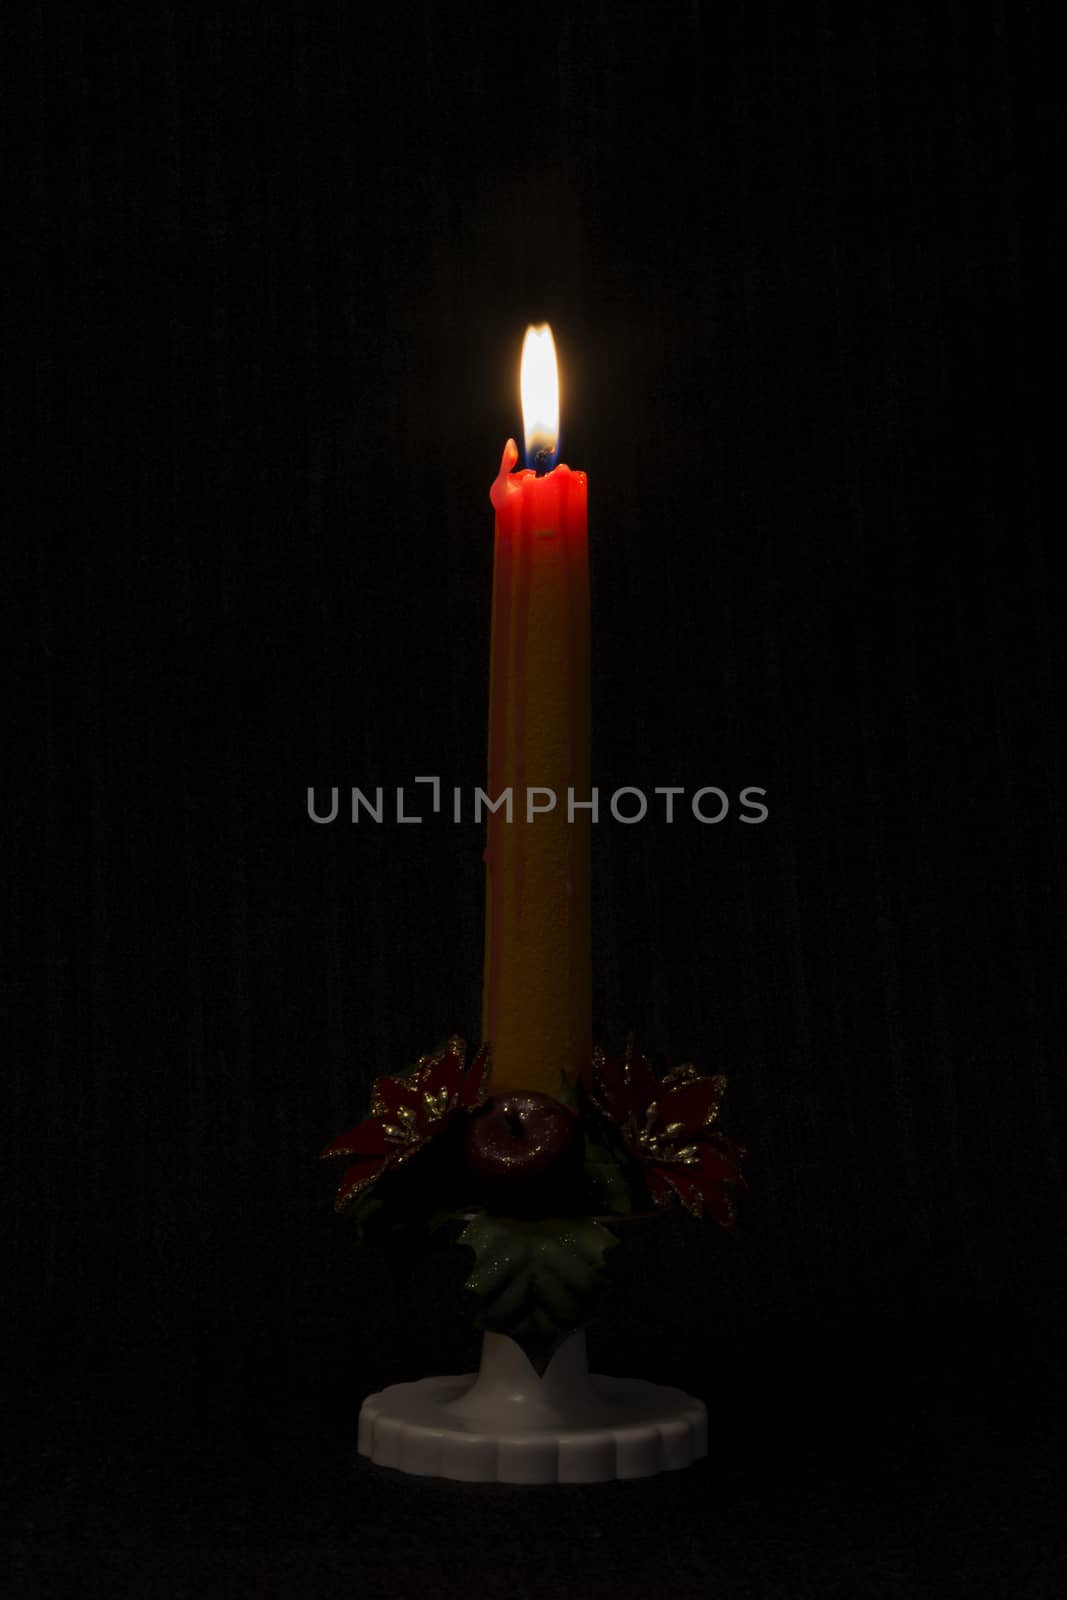 Festive candles lit in the dark by Grommik